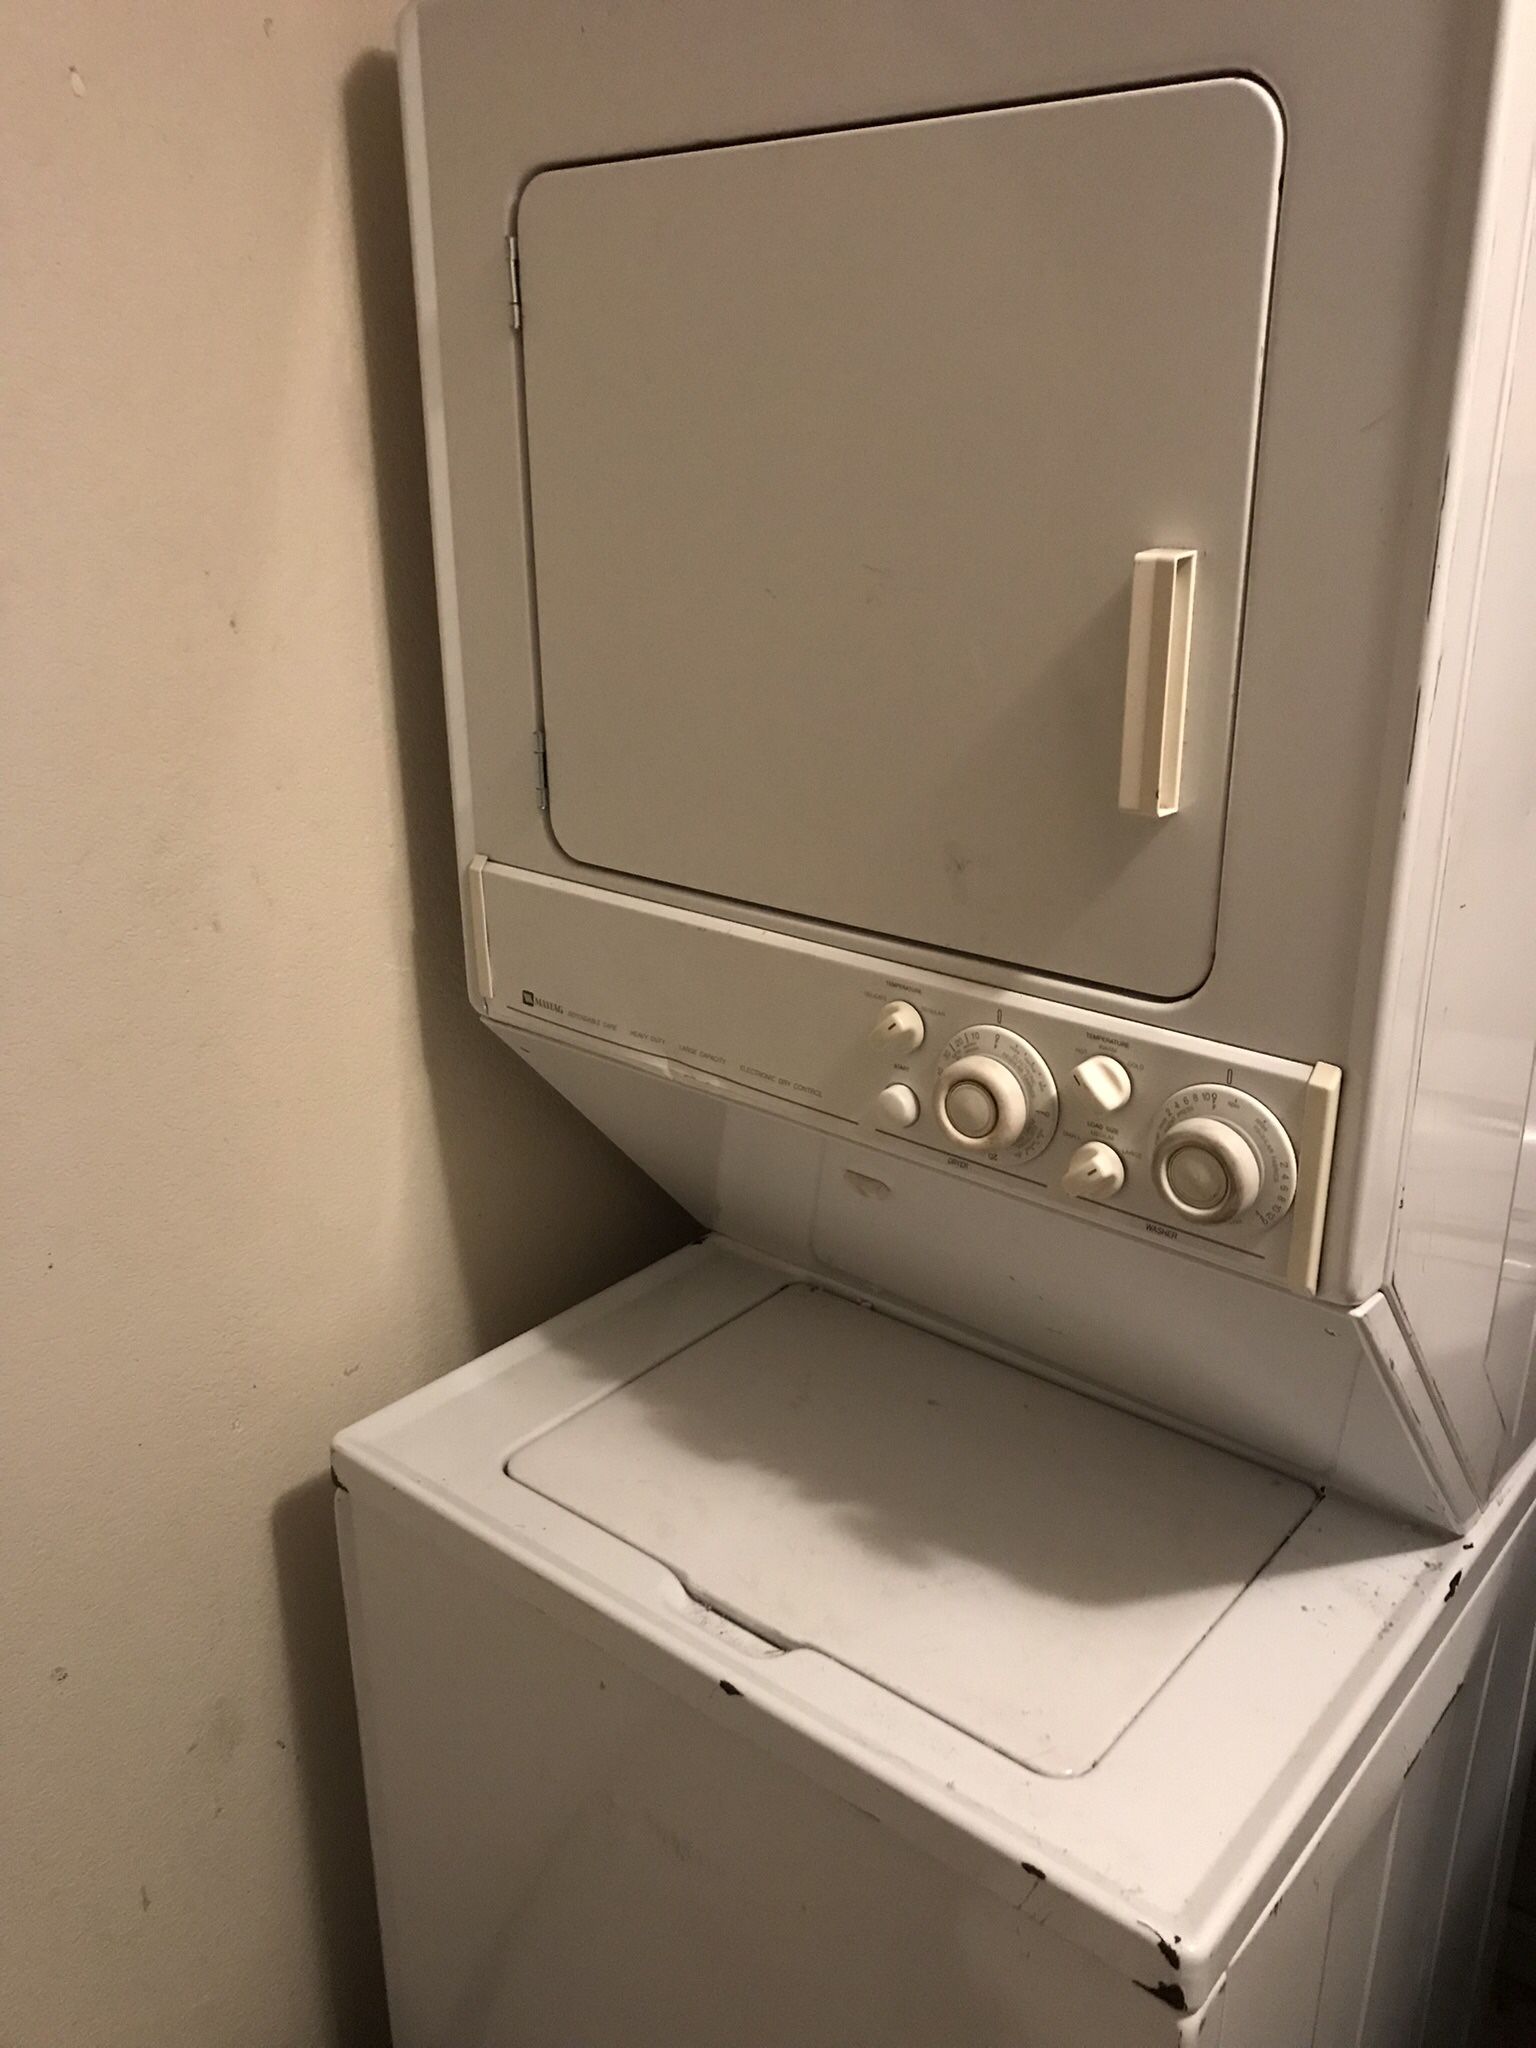 Stacked Maytag Washer And Dryer 